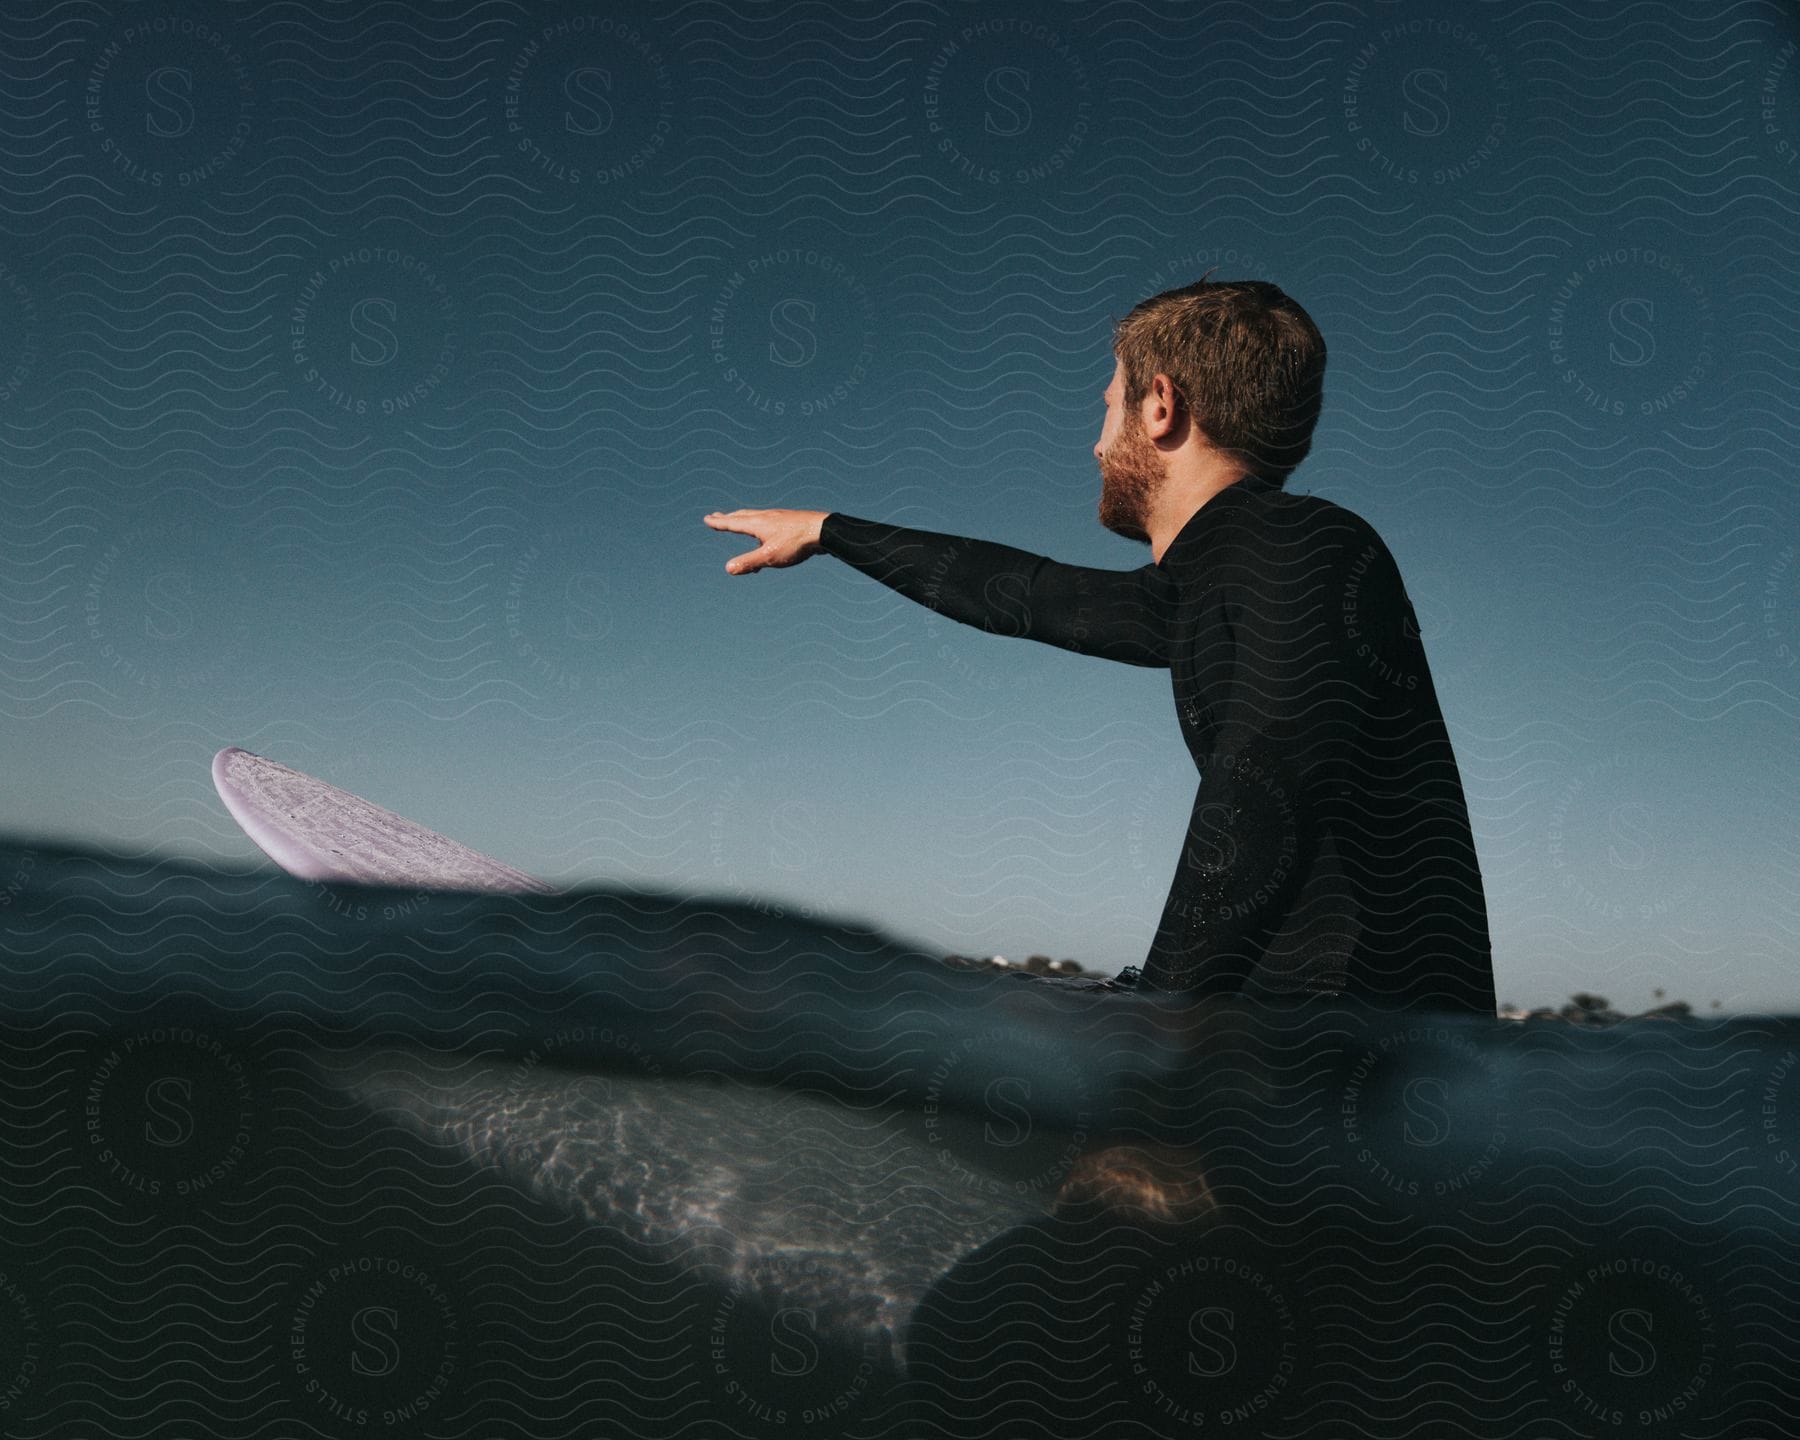 A surfer sitting on a surfboard in a calm sea, pointing out a wave.